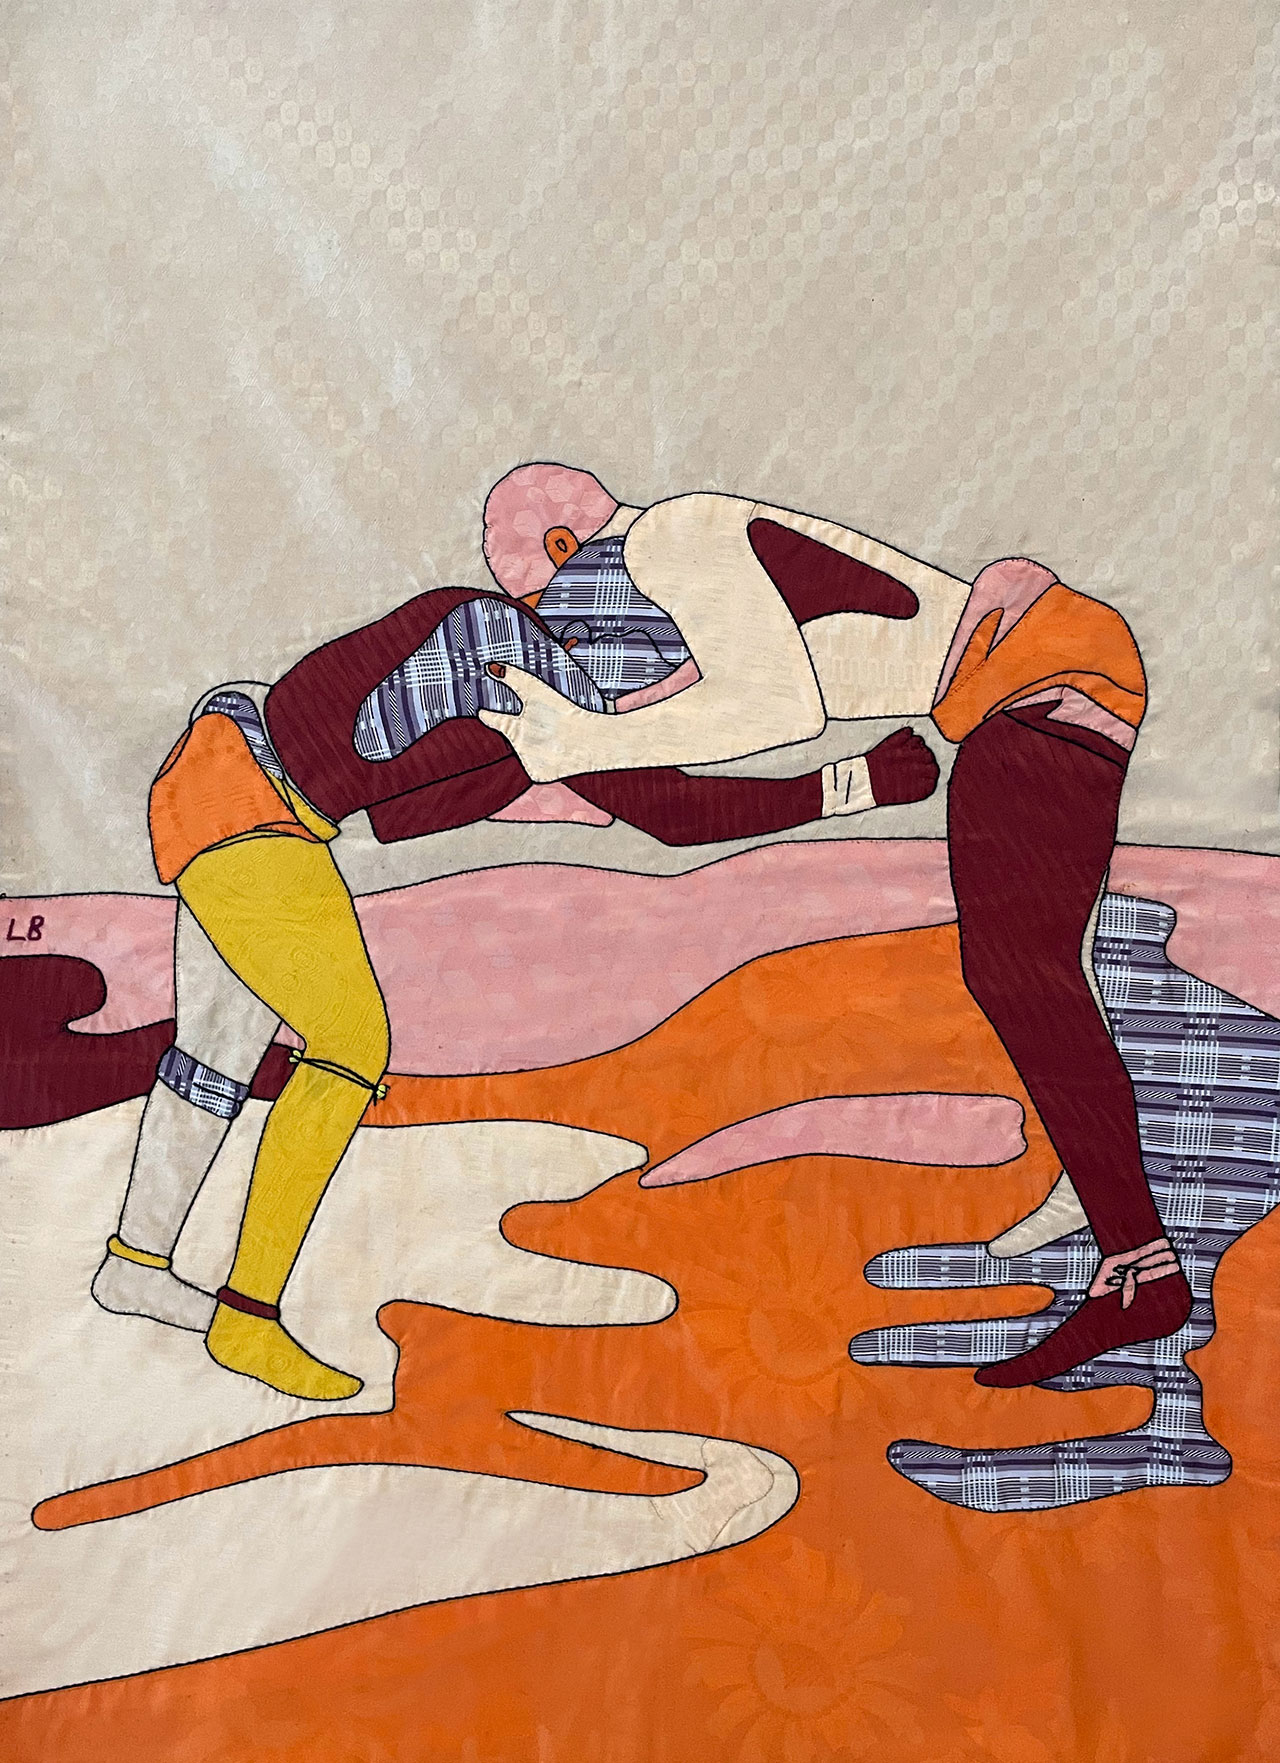 Louis Barthélemy, KHAYAMIYA 14 - THE GRIP from the Lutteurs/Wrestlers series, 2021. Appliquéd and hand embroidered «bazins» on cotton canvas. Unique edition.